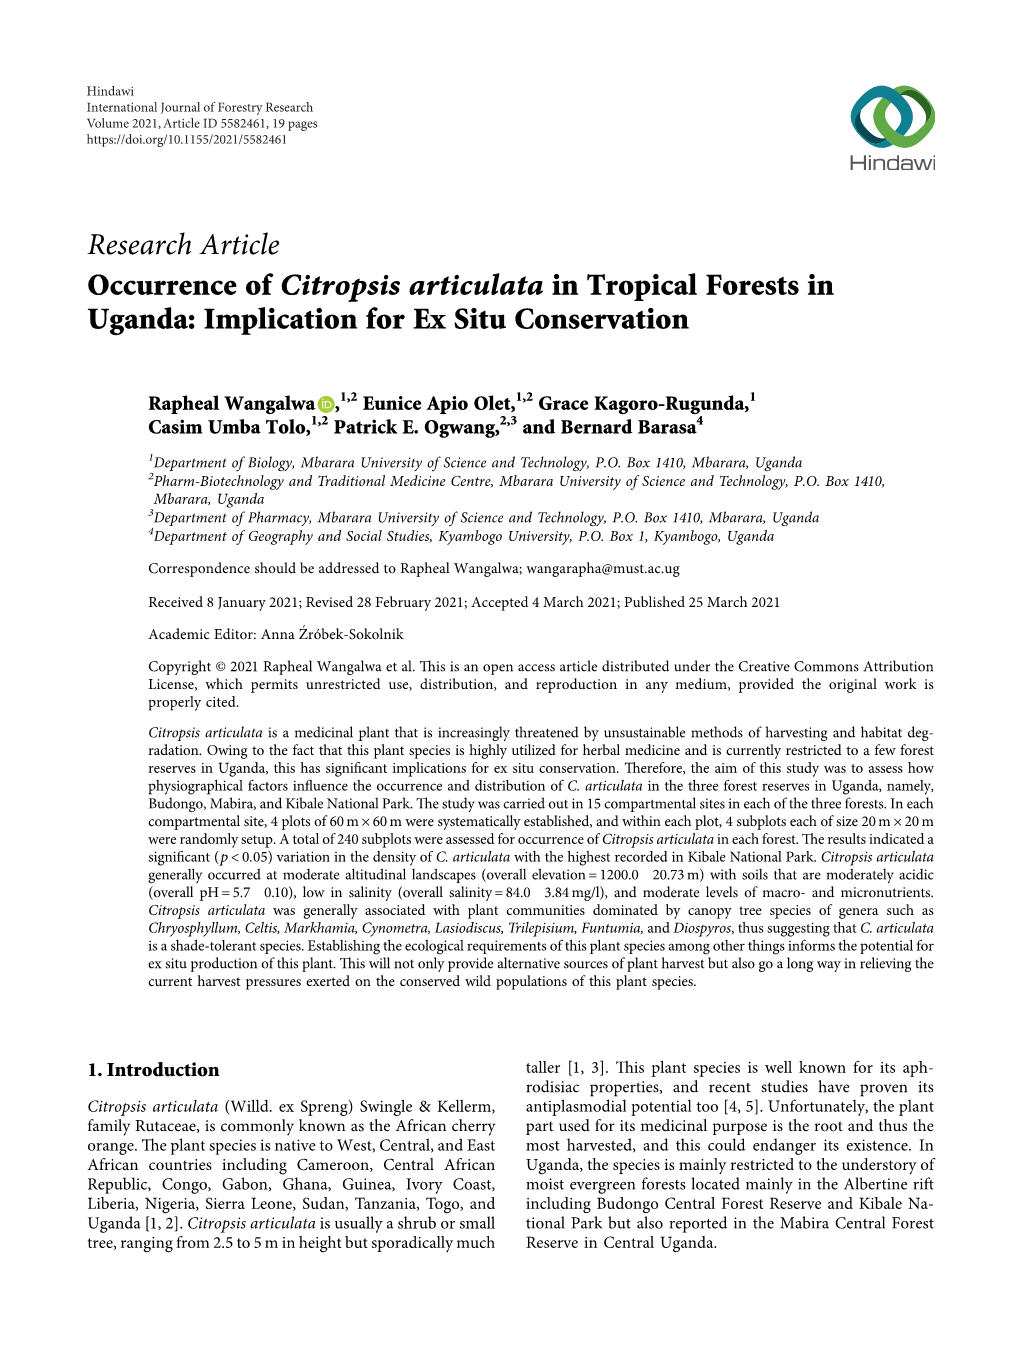 Occurrence of Citropsis Articulata in Tropical Forests in Uganda: Implication for Ex Situ Conservation